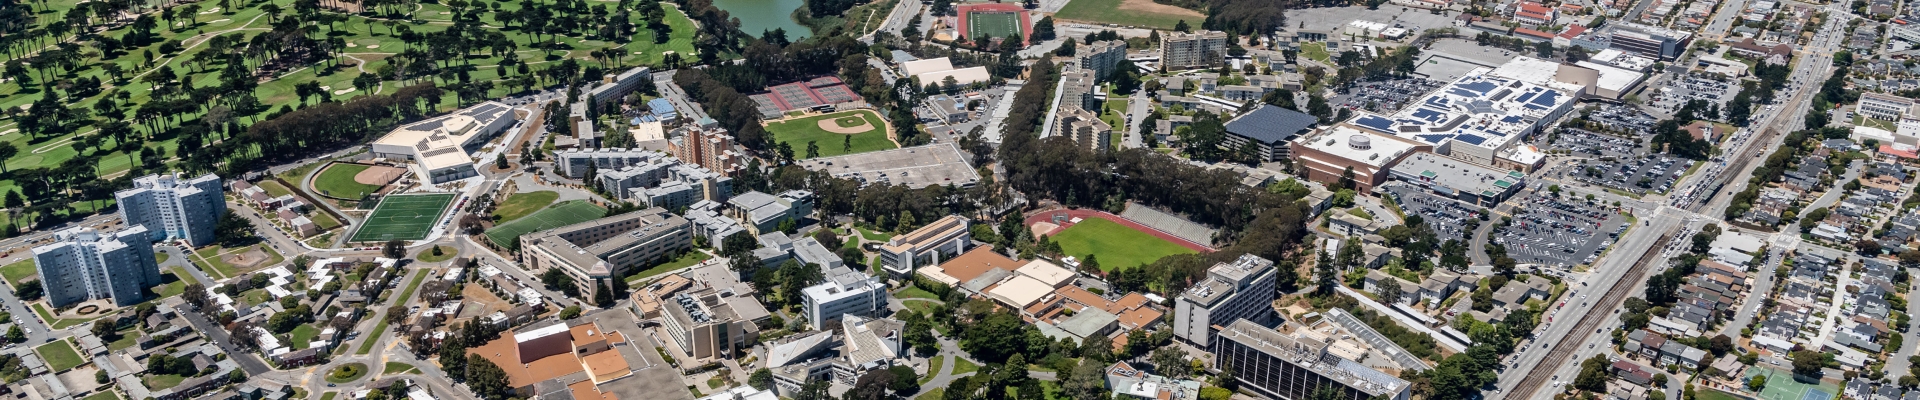 campus from the remote view